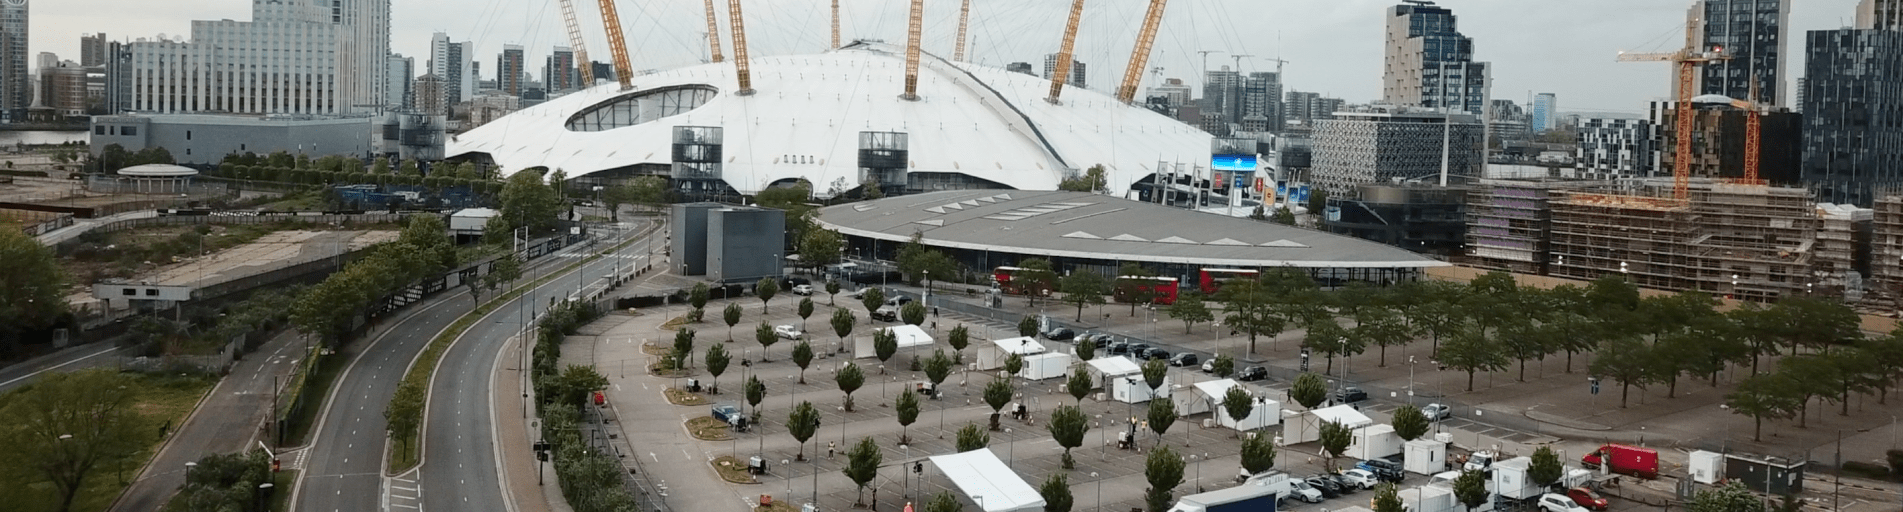 NHS test and trace centre at the o2 arena